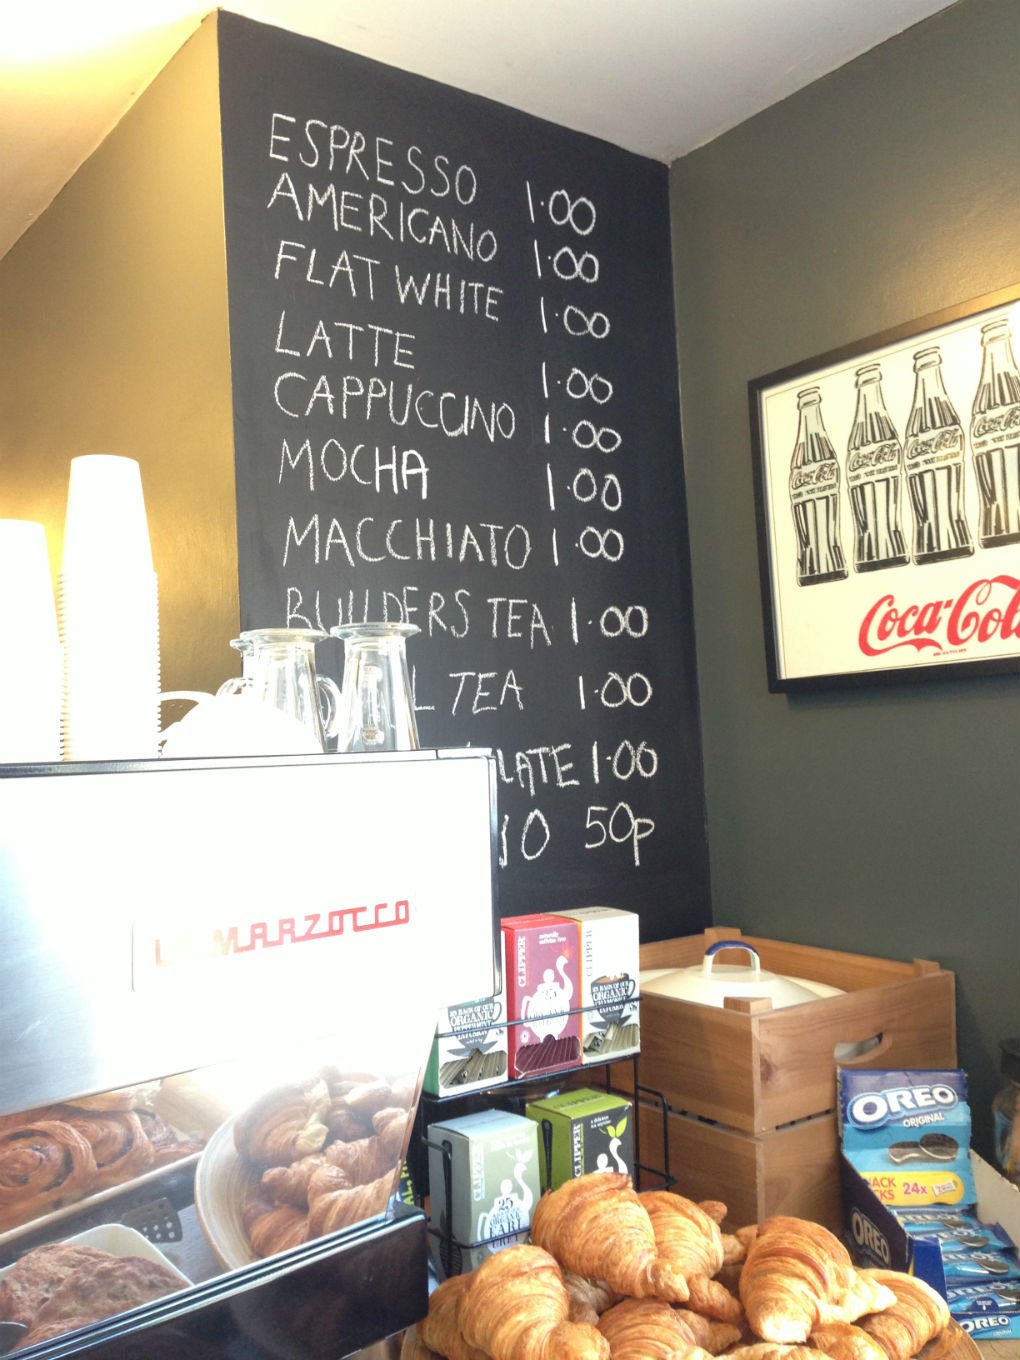 You can't argue with that. Everything's a quid at both branches of House Presso. Pic: SE